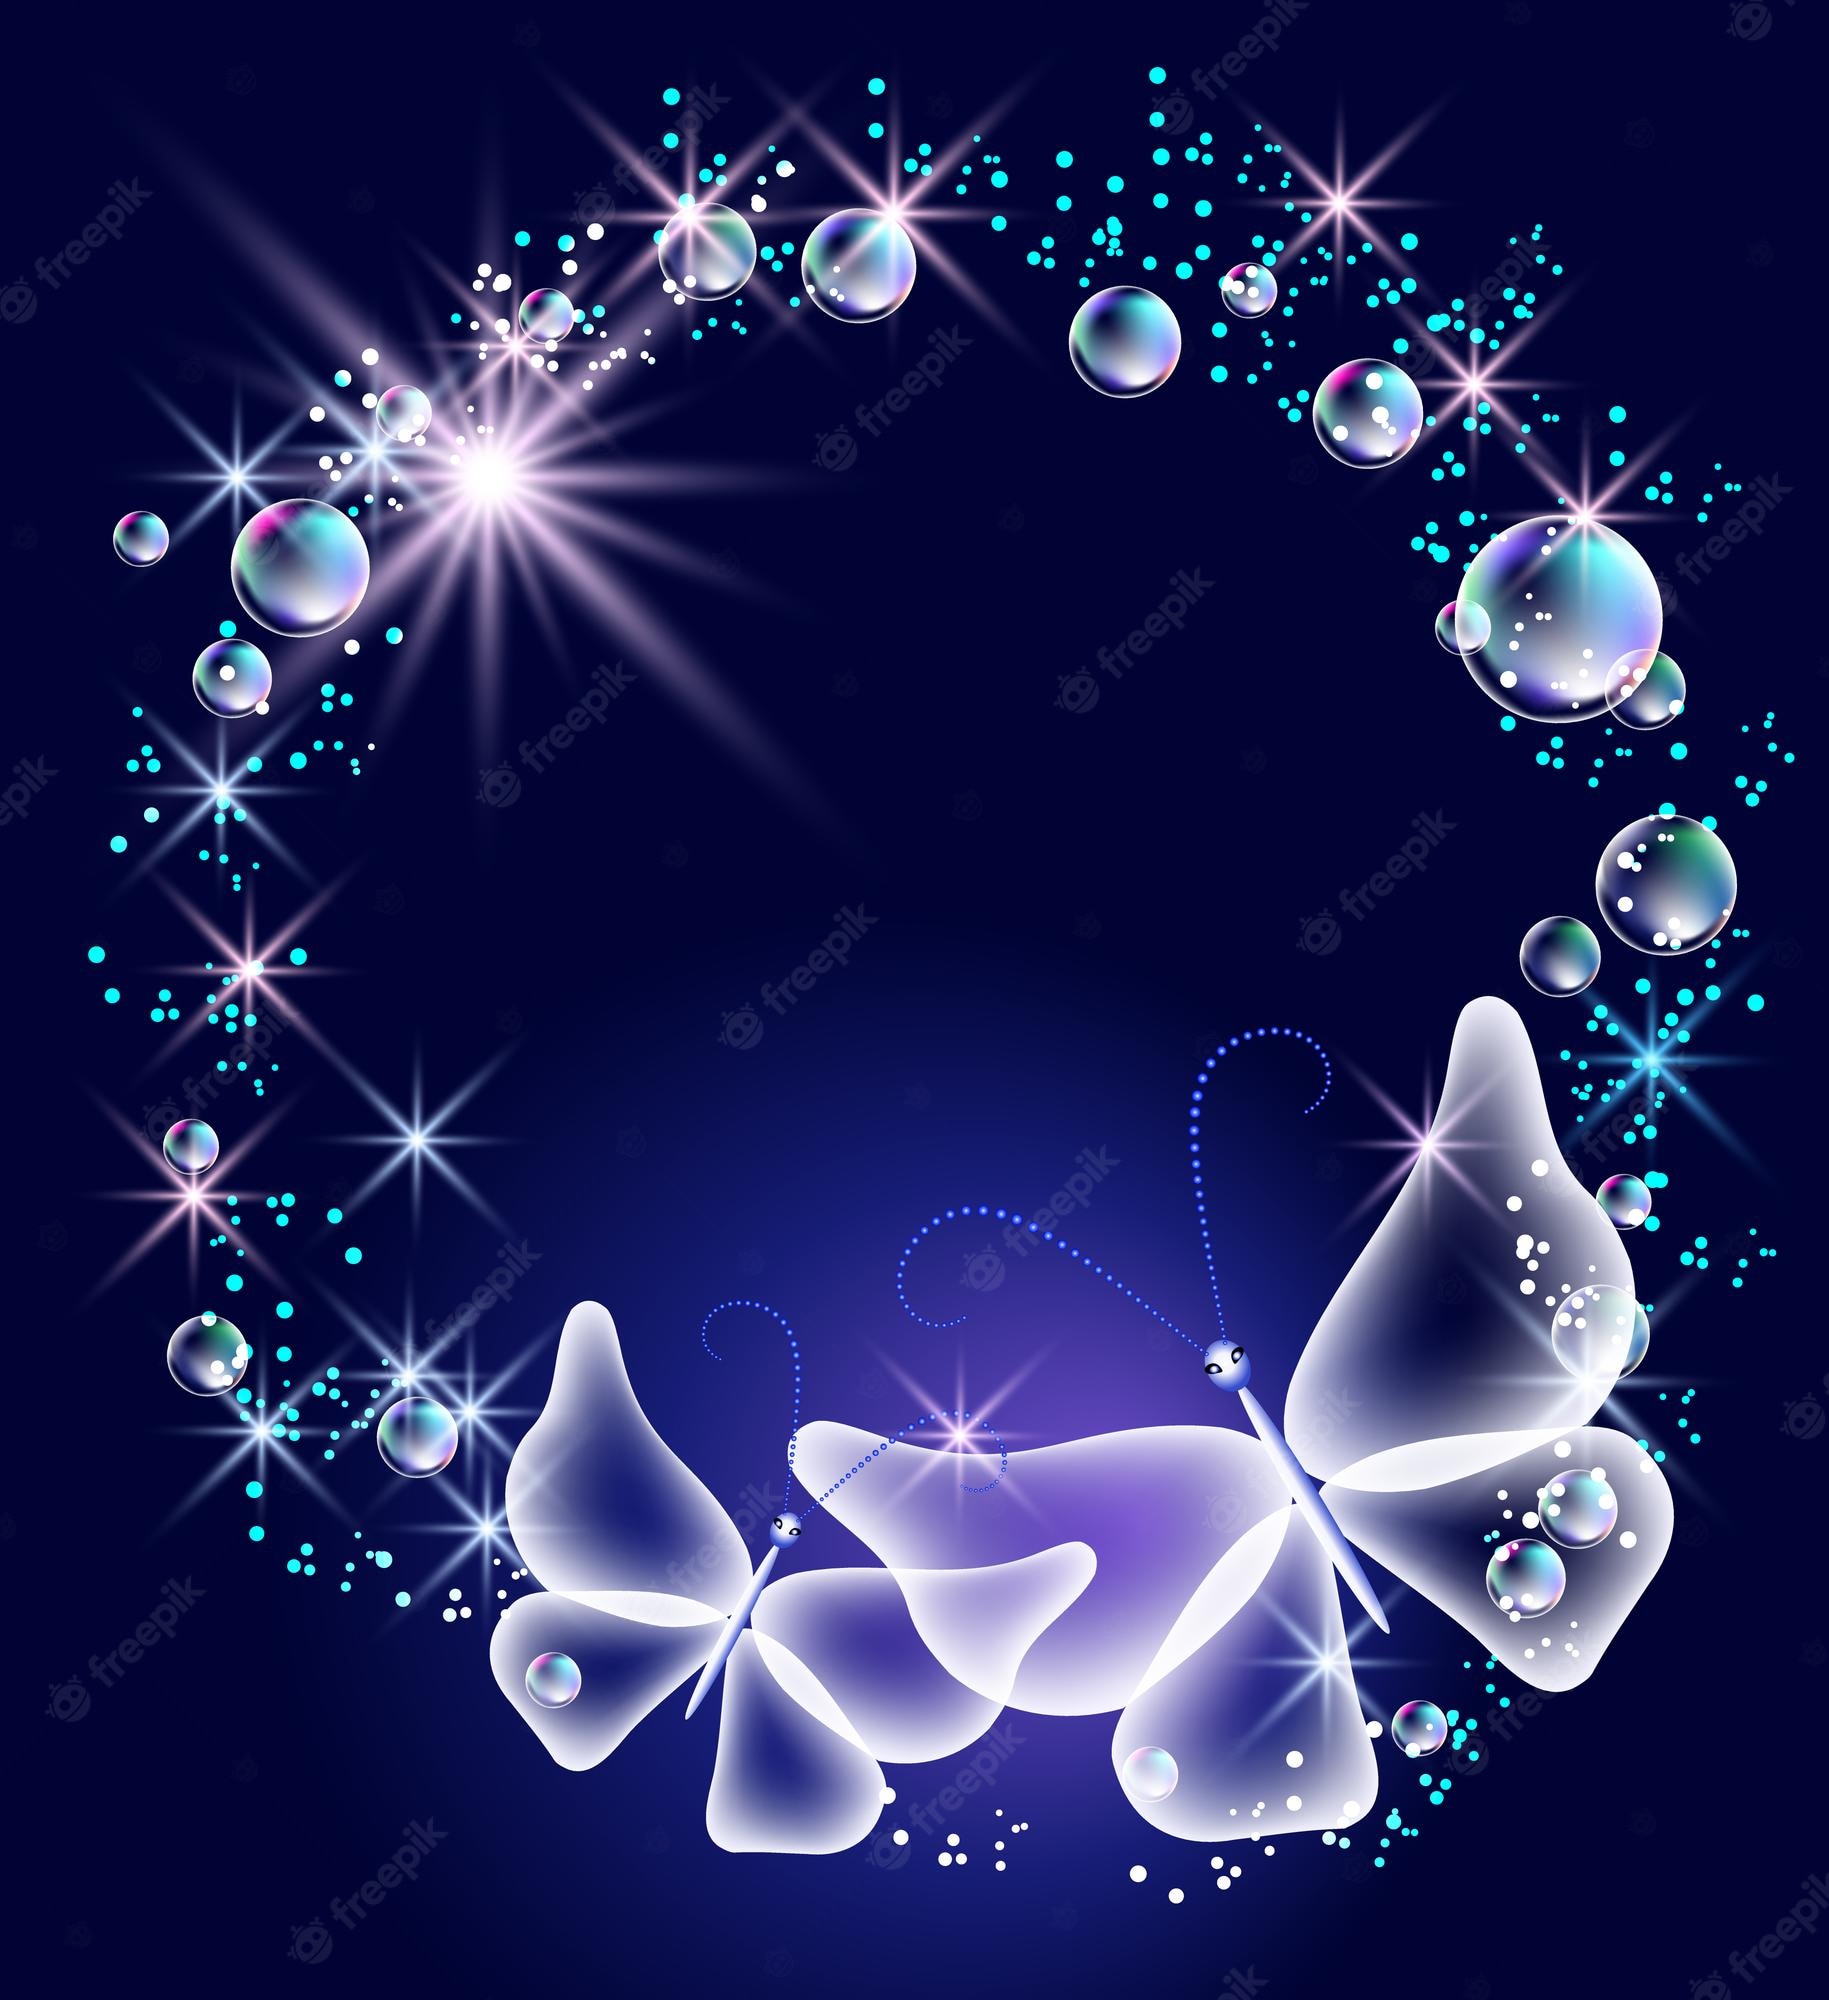 Crystal Blue Glitter Butterfly Wallpapers